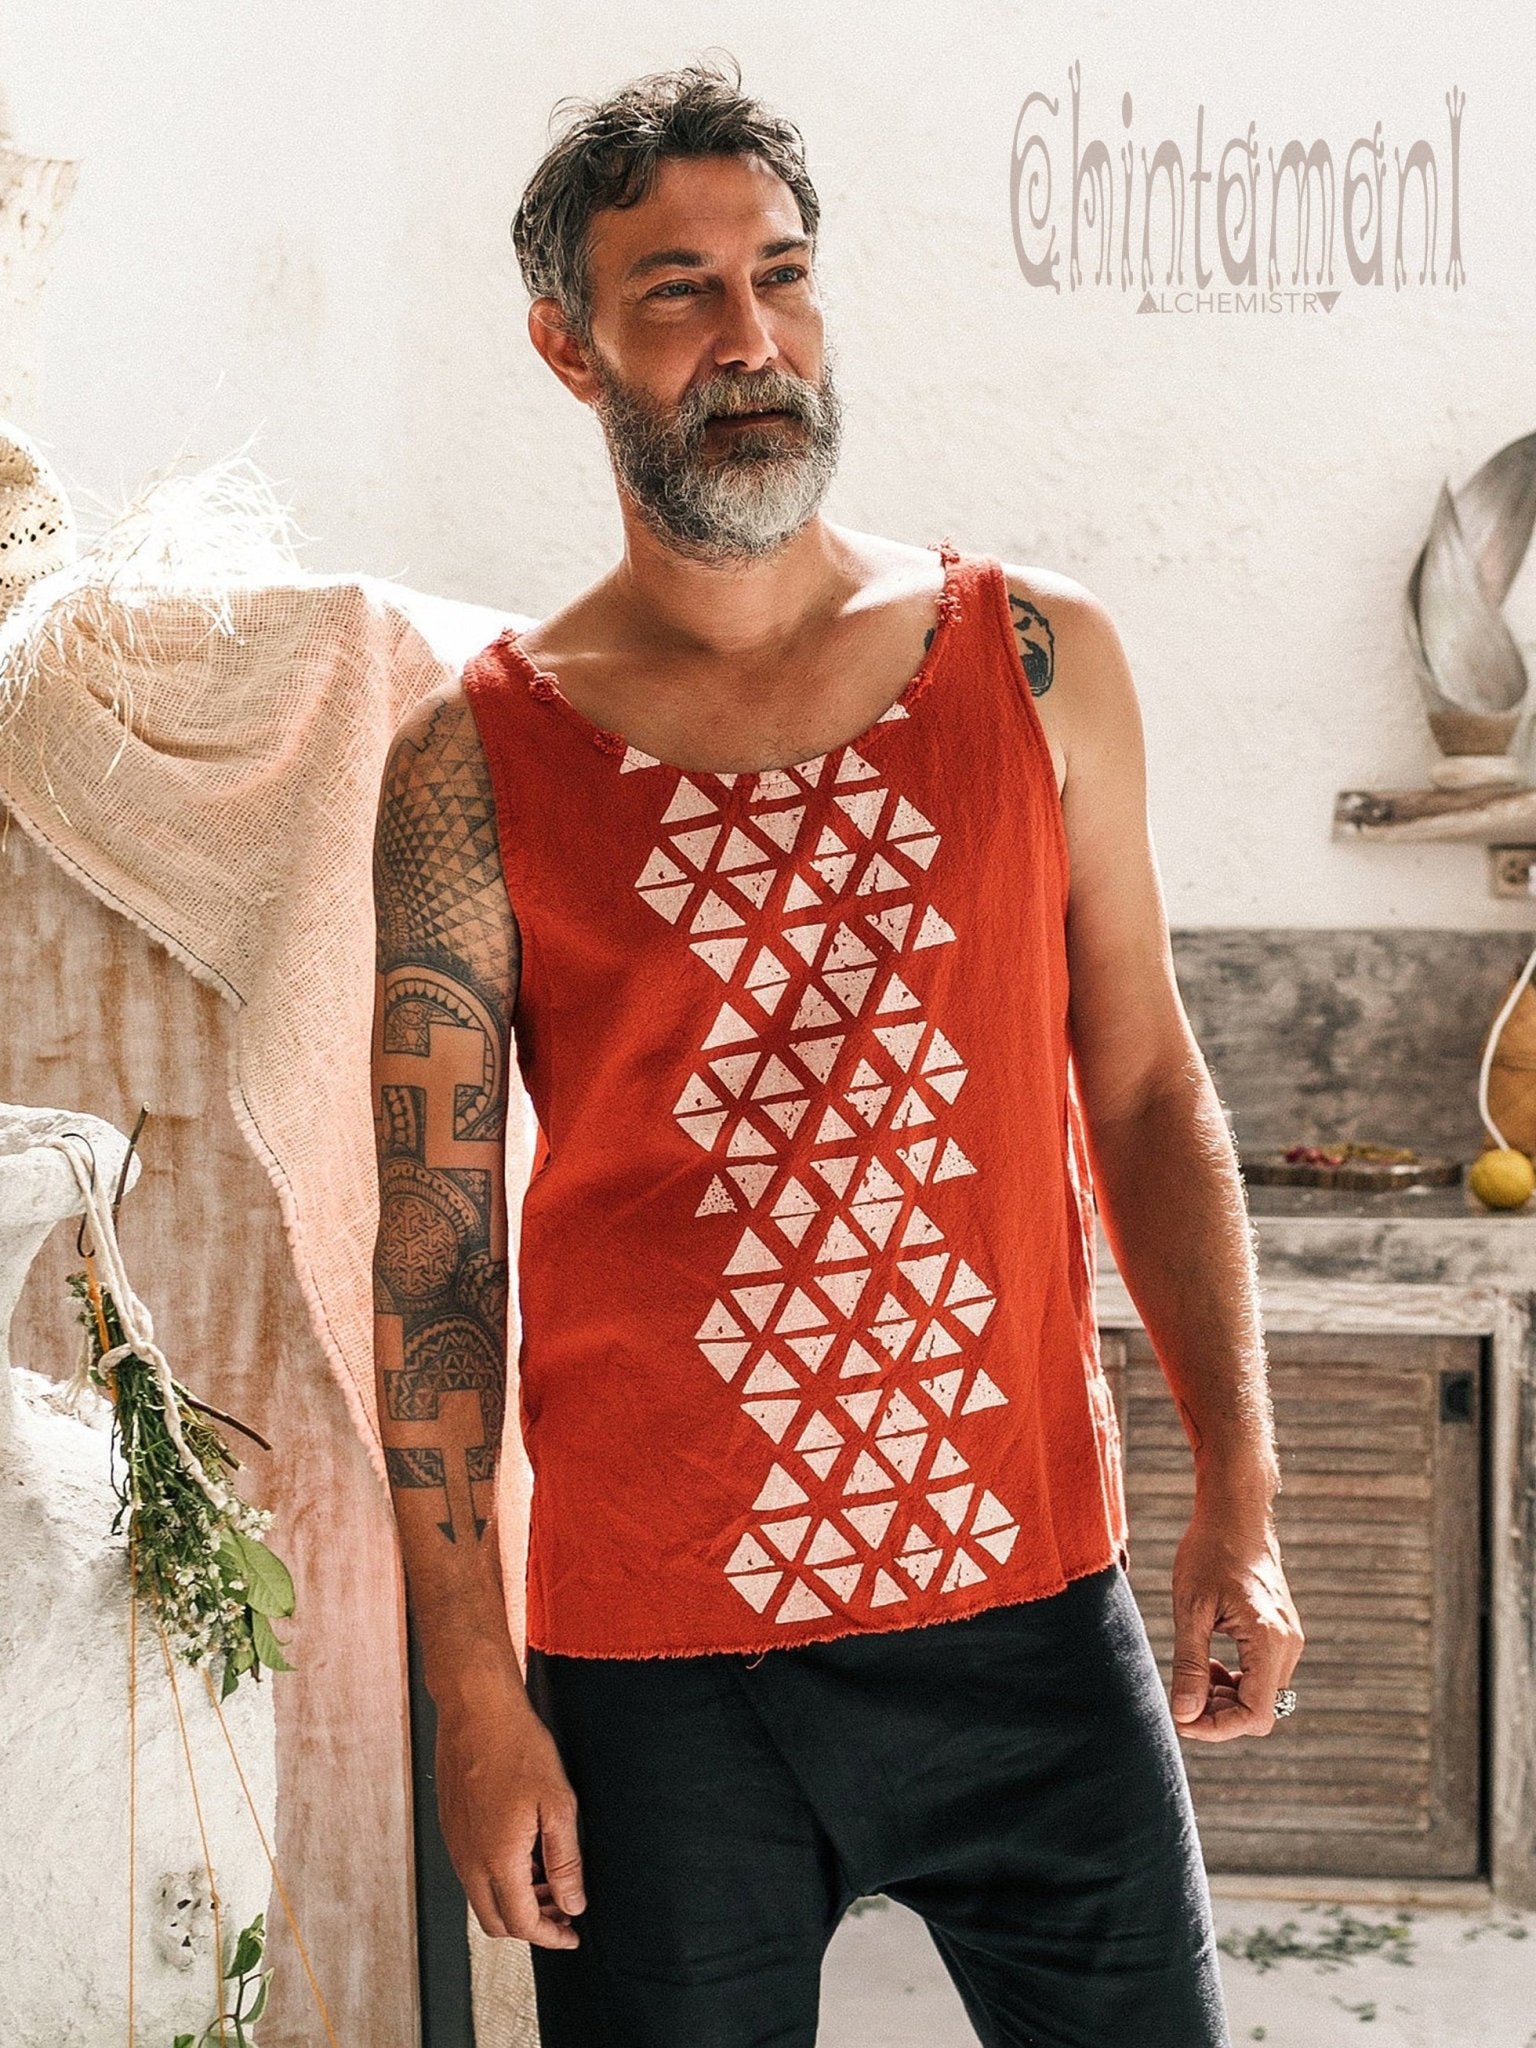 Nomad Cotton Tank Top for Men with Geometric Screen Print / Red Ochre –  ChintamaniAlchemi